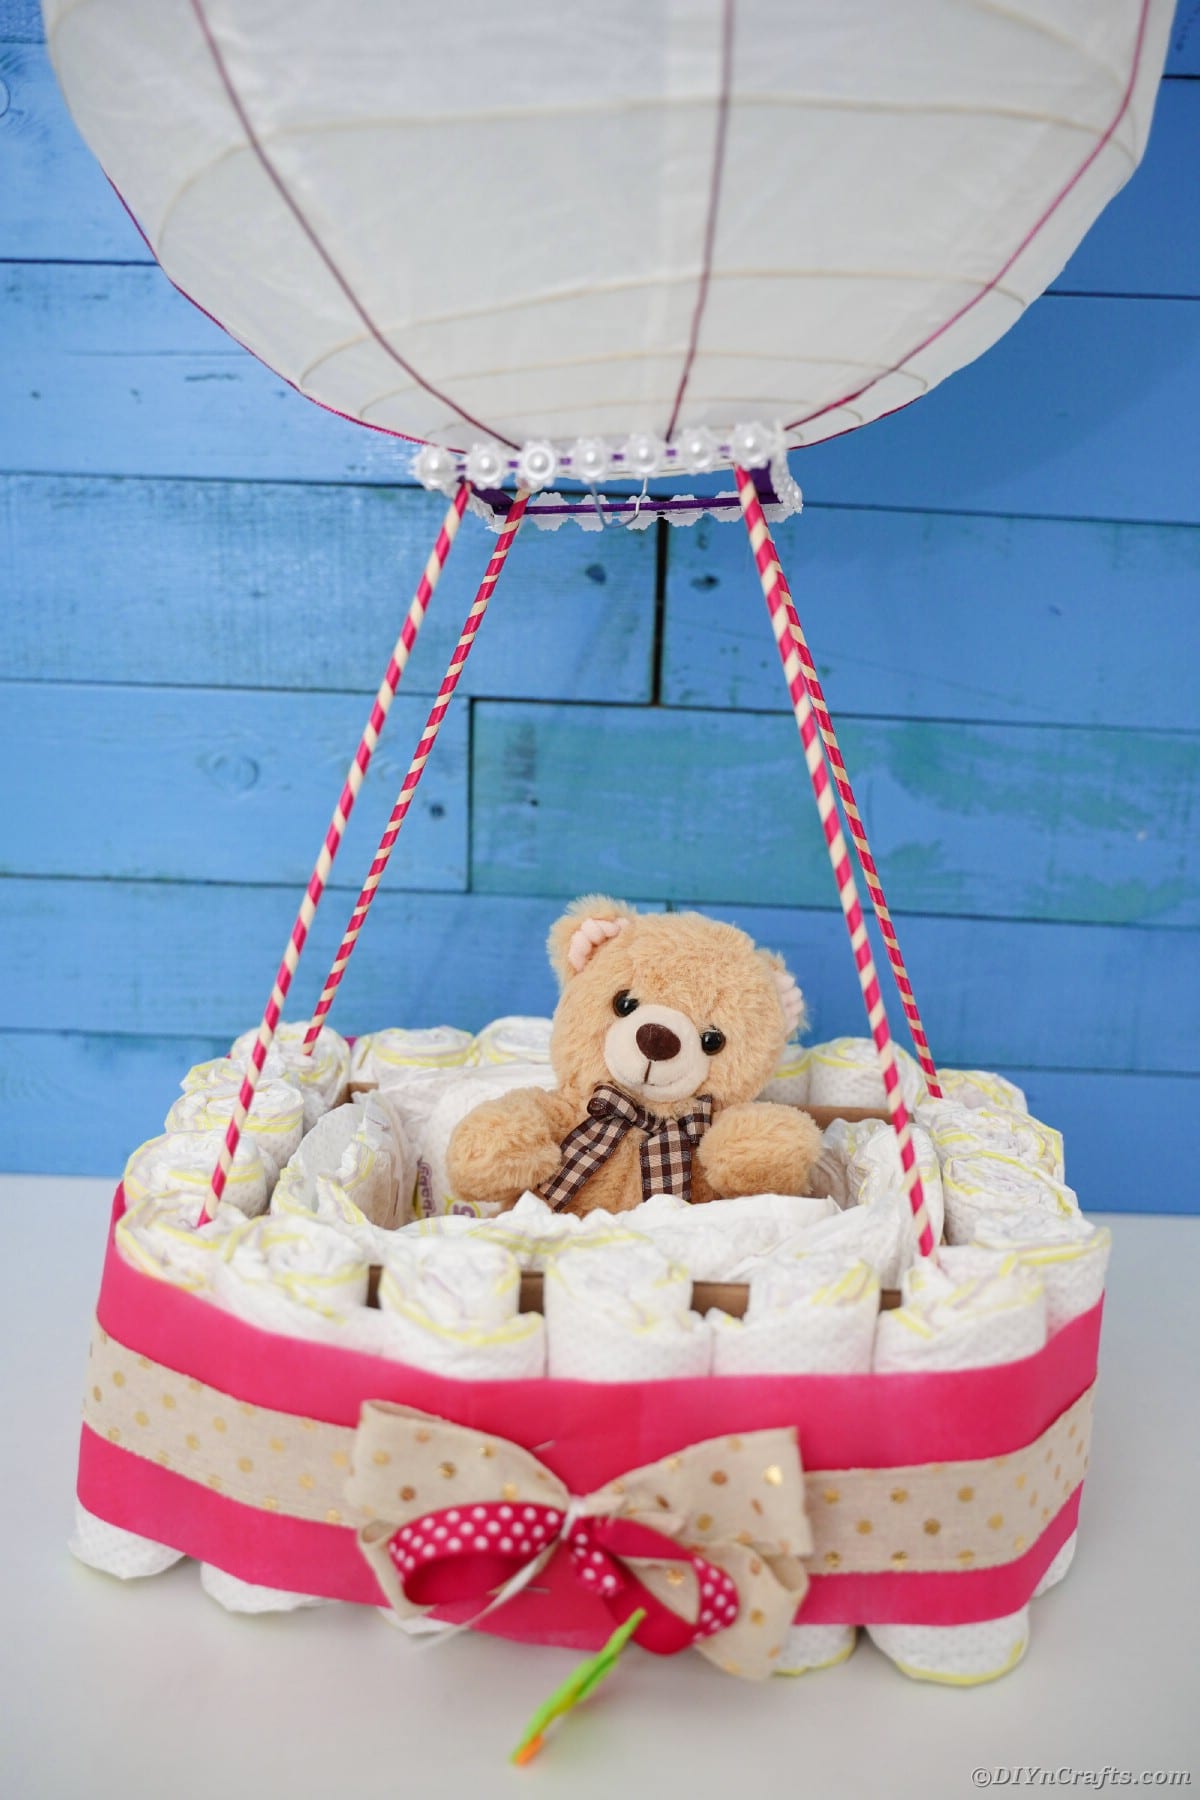 Hot air balloon diaper cake in front of blue wall